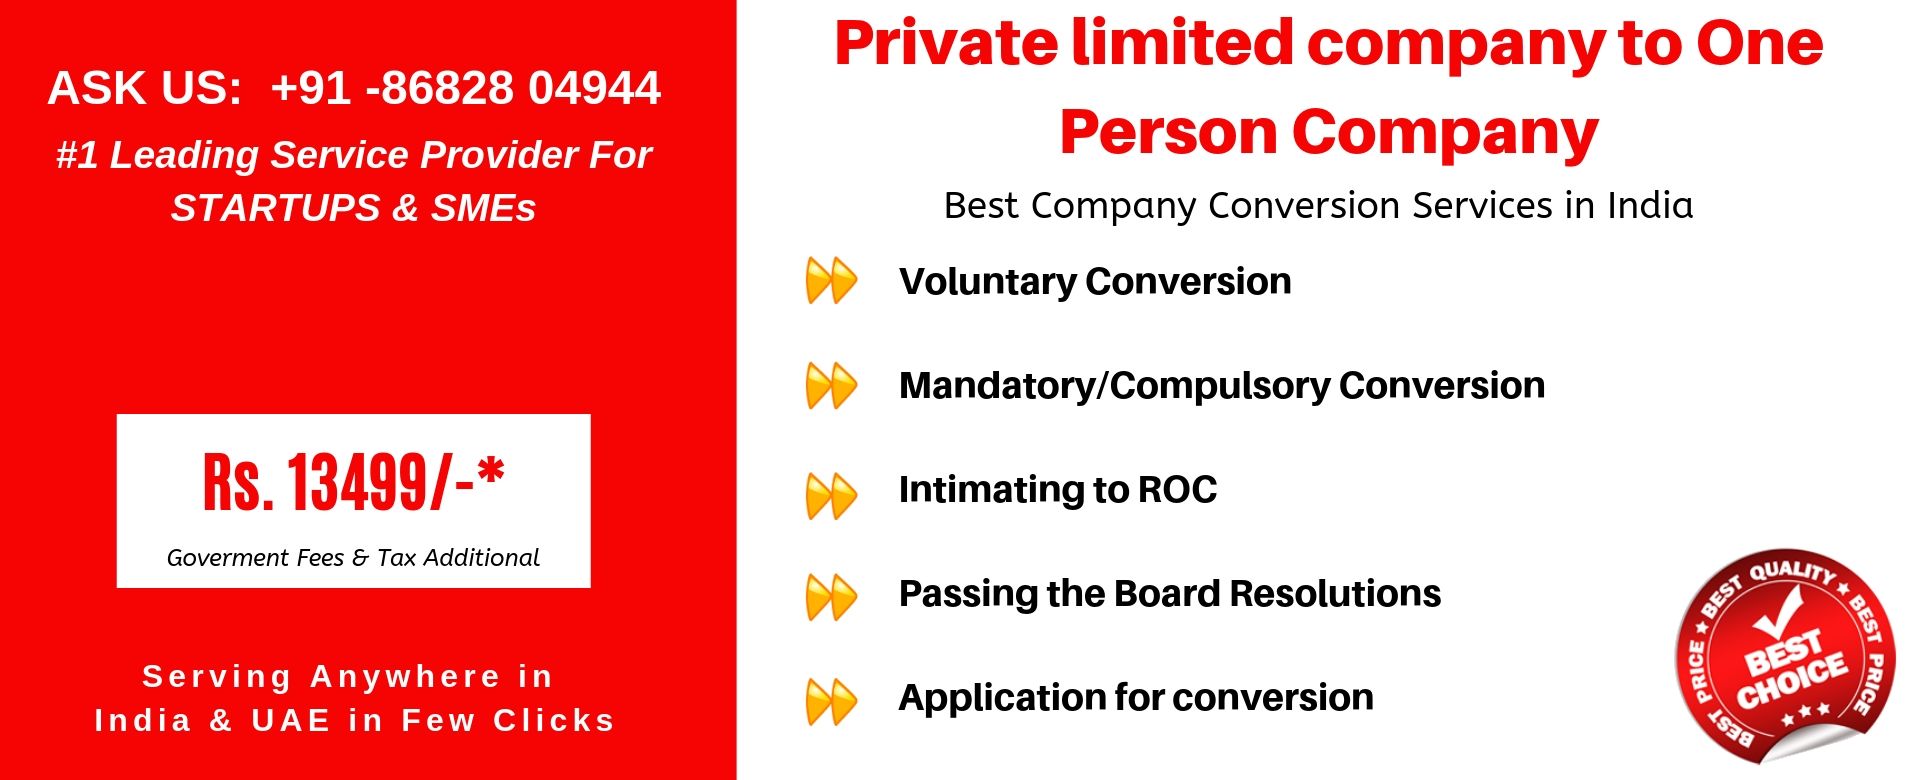 private limited company to one person company in india